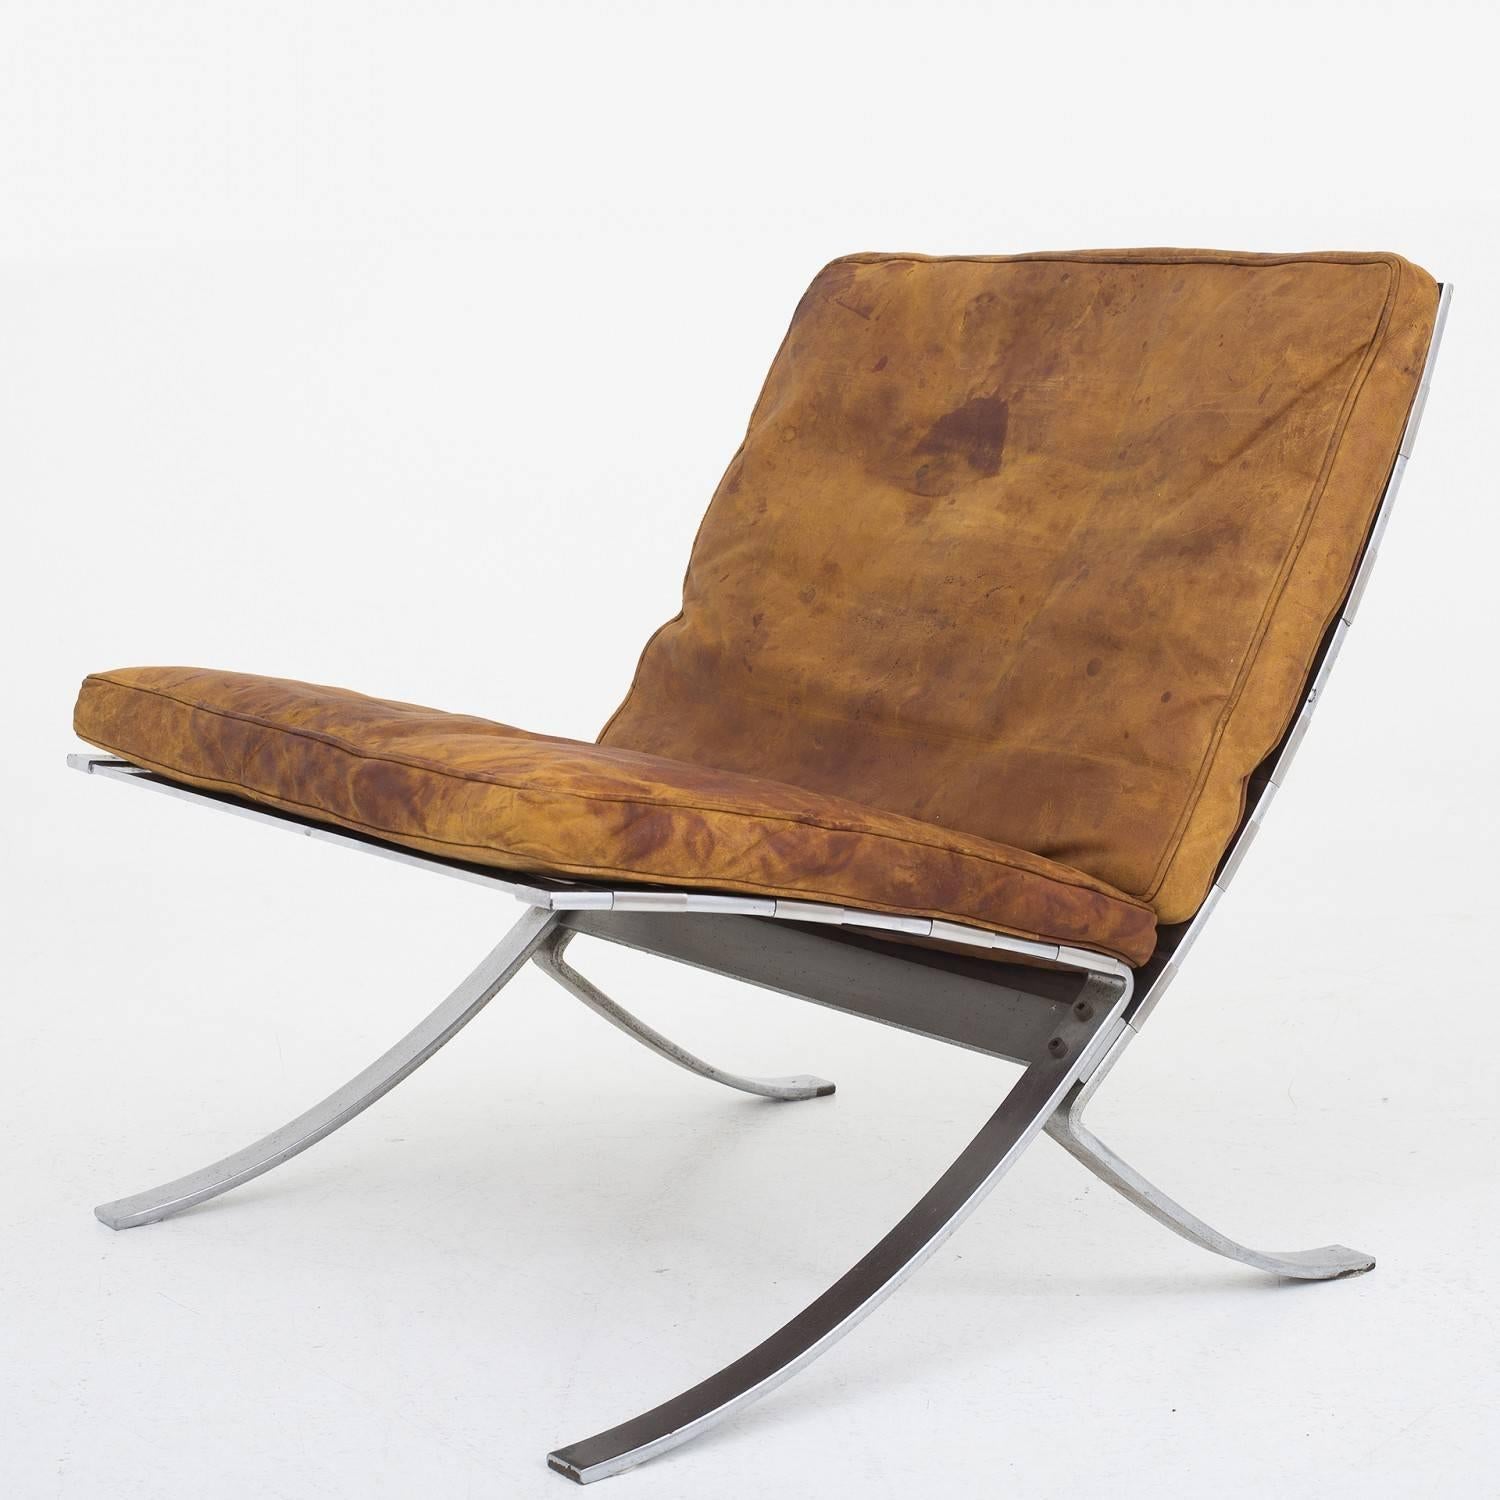 Lounge chair and stool in steel and patinated leather. Model "tango" Designed by Steen Ostergaard. Maker Terrex Art. The stool is very rare.